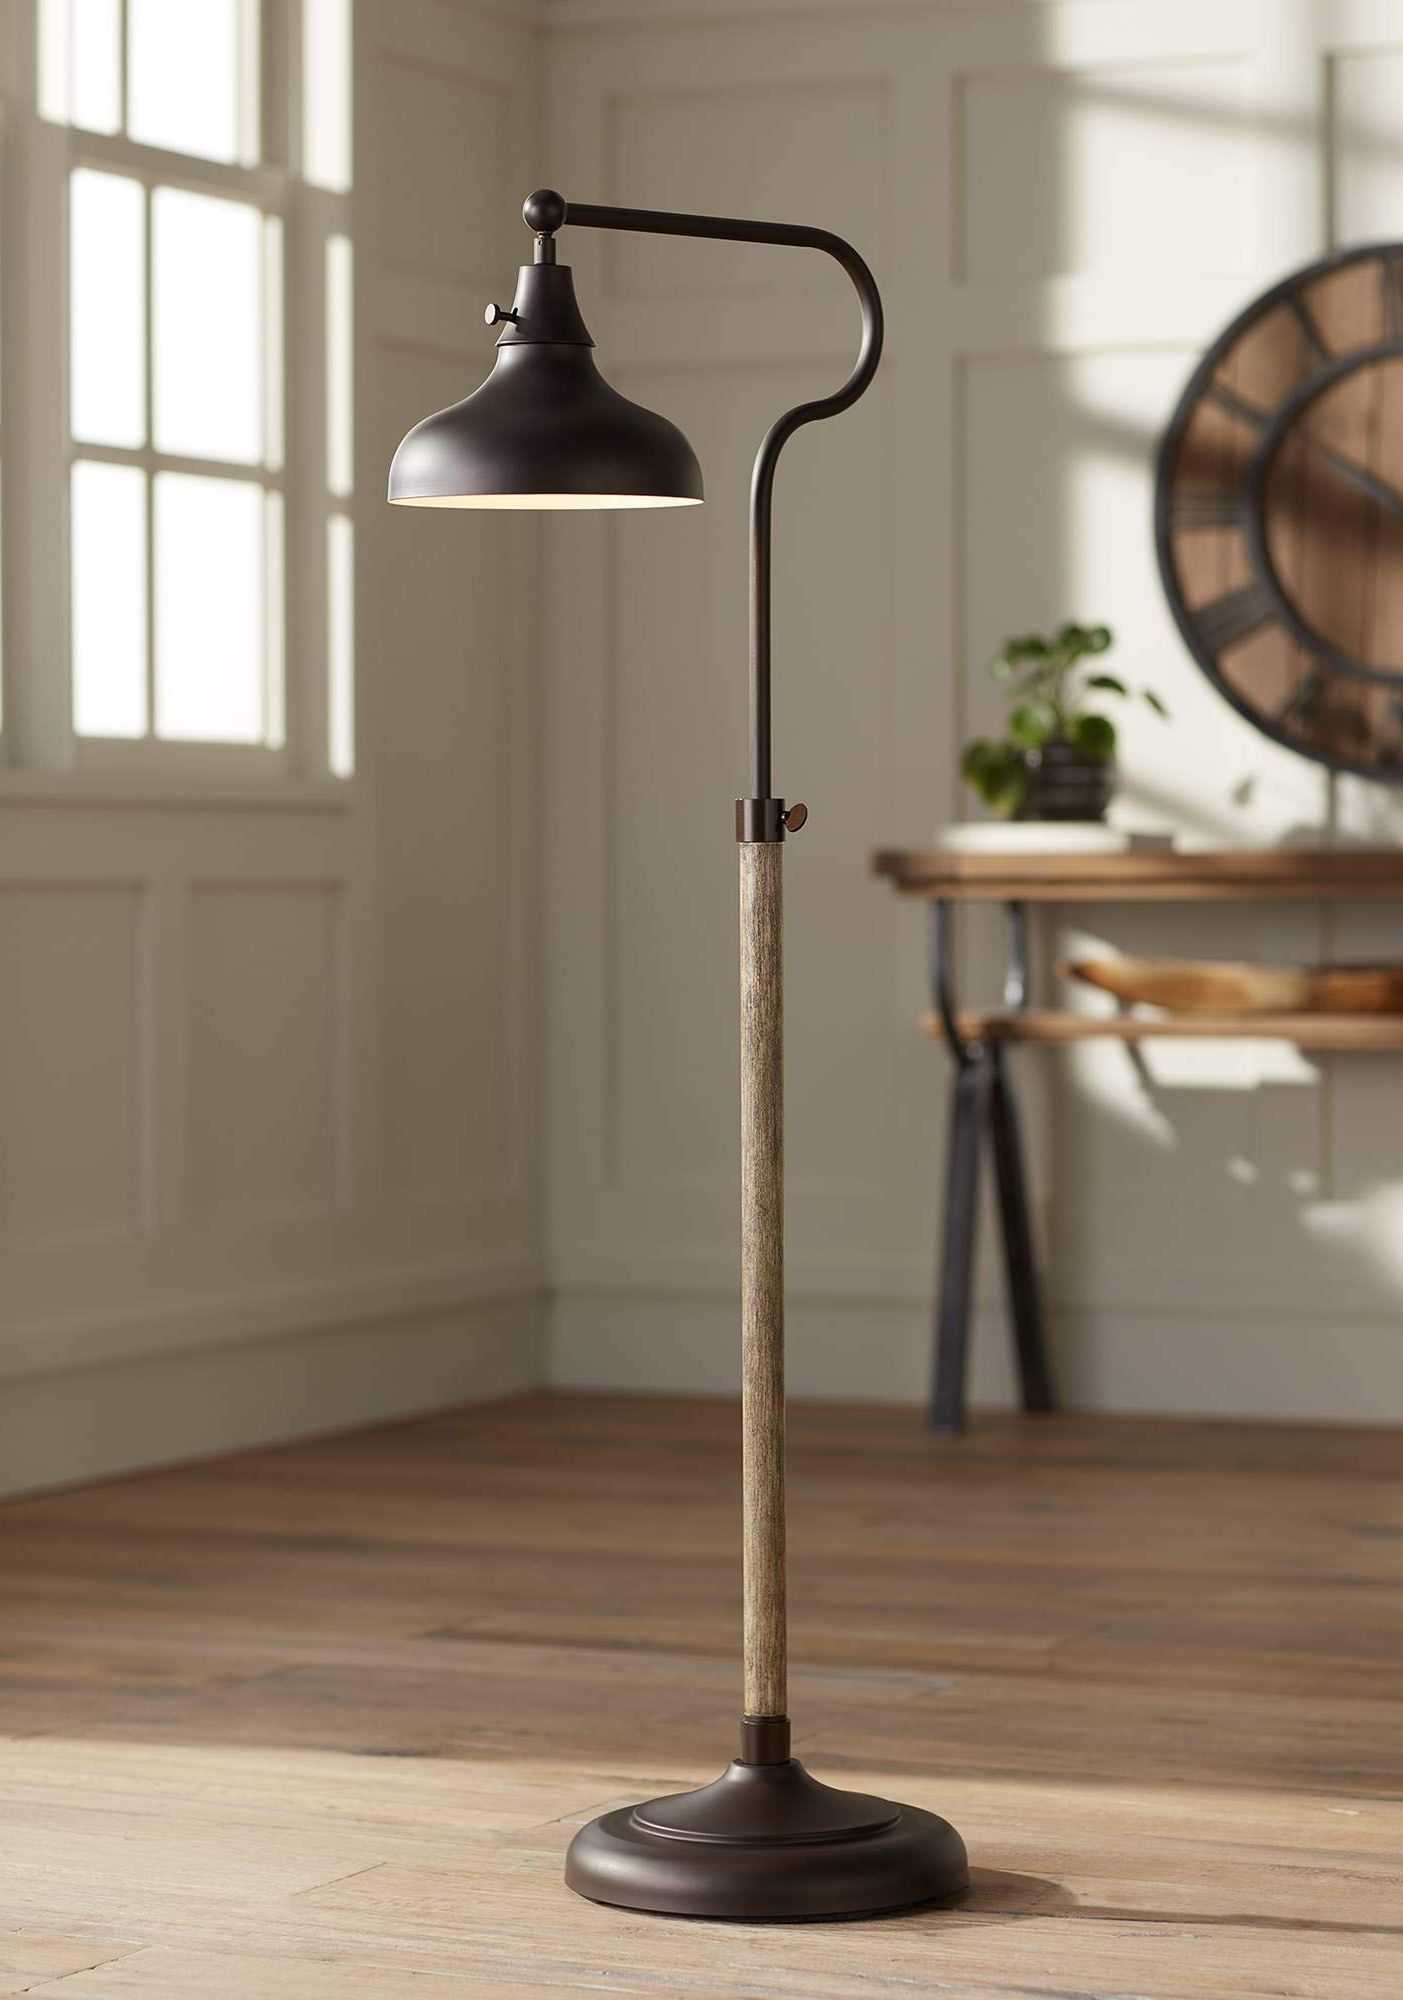 Franklin Iron Works Ferris Industrial Rustic Farmhouse Adjustable Pharmacy Floor  Lamp Downbridge 57" Tall Bronze Faux In Favorite Rustic Standing Lamps (View 5 of 10)